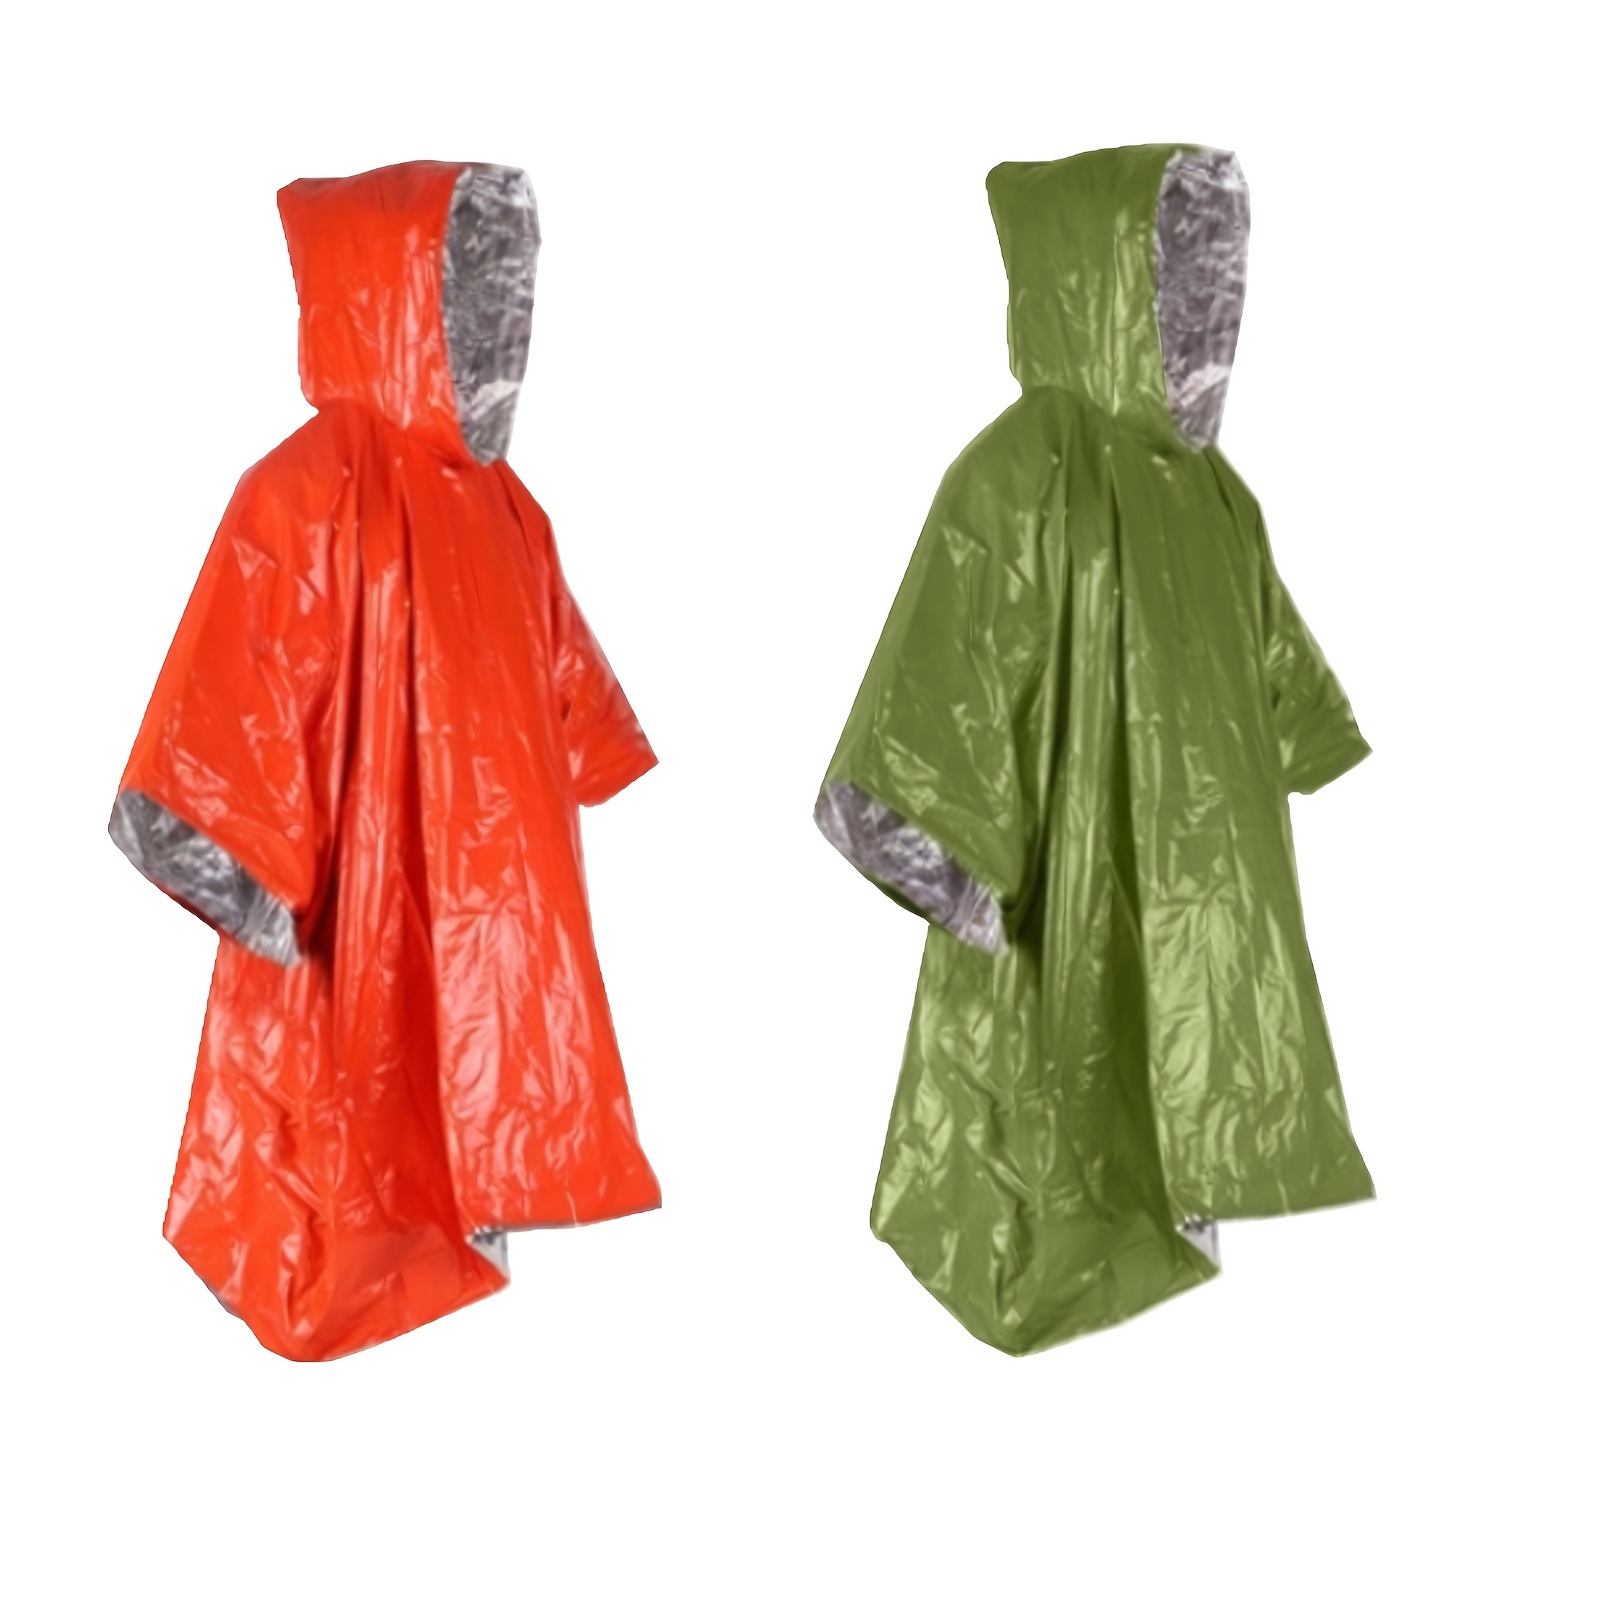 Hombres Mujeres Lluvia Poncho Impermeable Desechable Con Capucha  Impermeable Chaqueta 10PCS